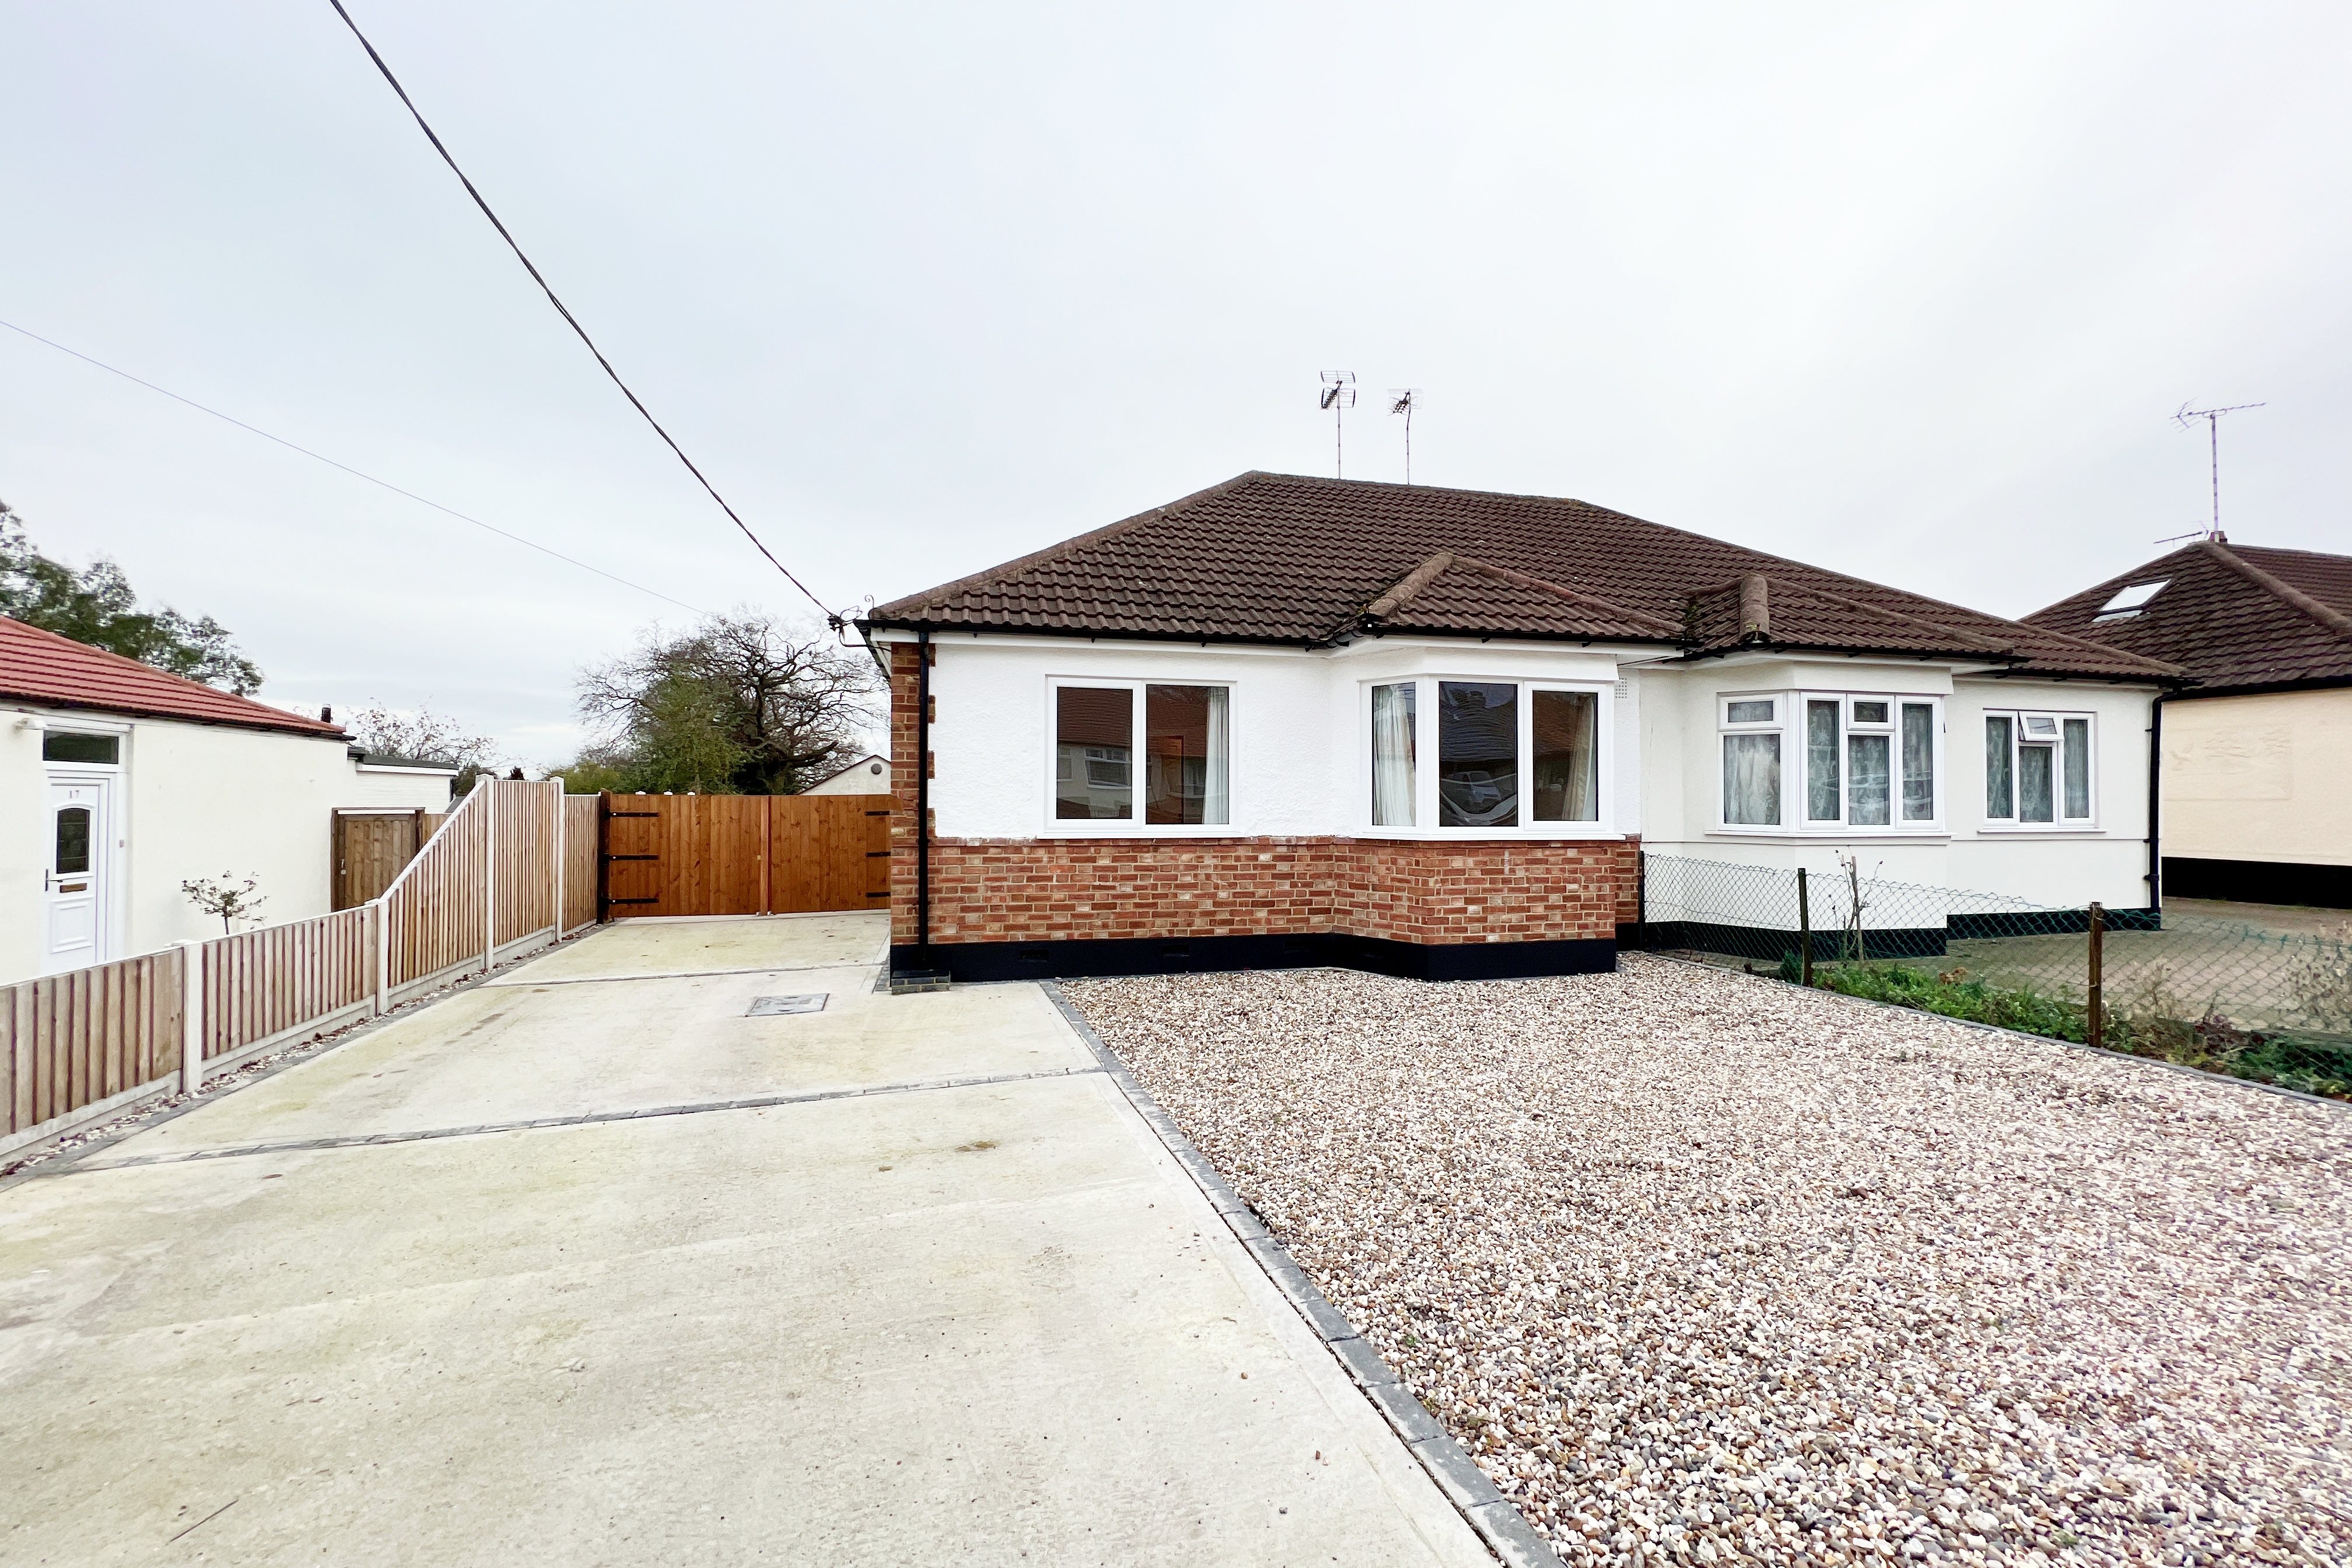 2 bed semi-detached bungalow to rent in Helena Road, Rayleigh, SS6 